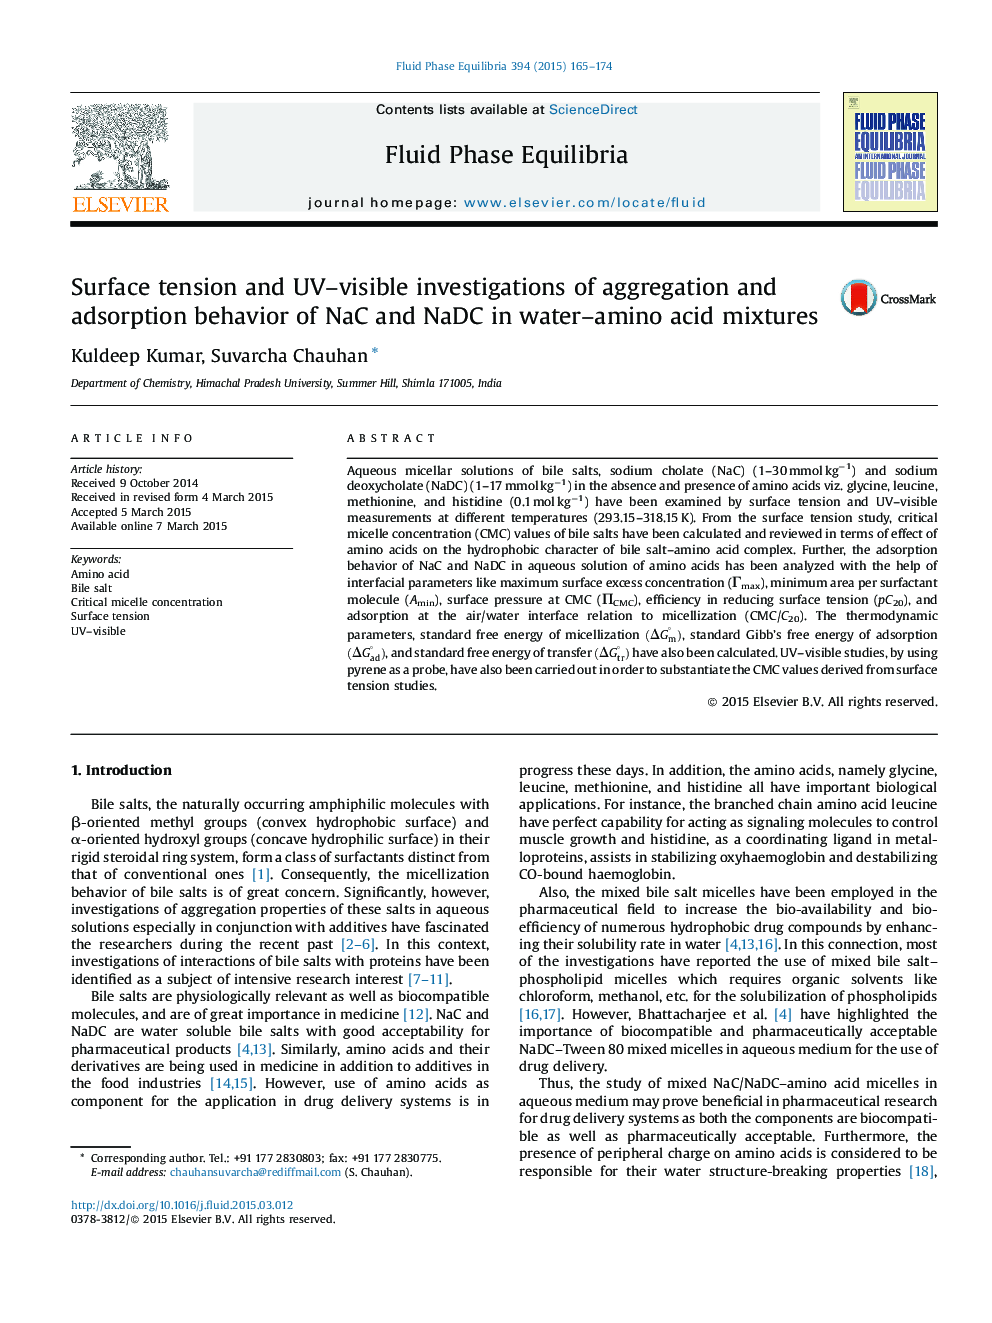 Surface tension and UV-visible investigations of aggregation and adsorption behavior of NaC and NaDC in water-amino acid mixtures